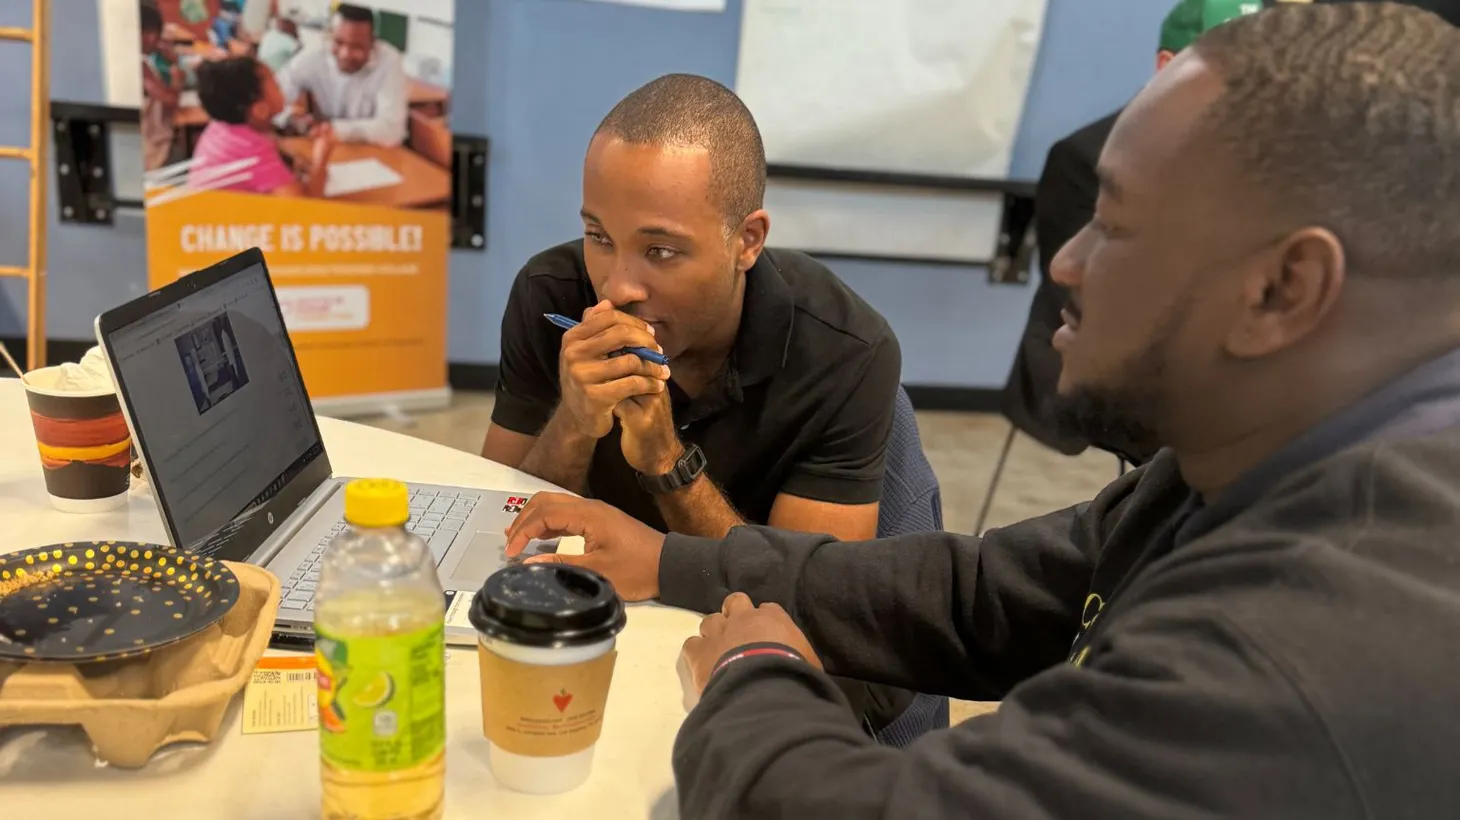 Teacher Village fellow Avery Watts (right) uses the EduCare SIMS game during a Components of Care training session. Next to him is Joshua Payne (left), a former student of Dr. Peter Watts, who now works as a teacher.